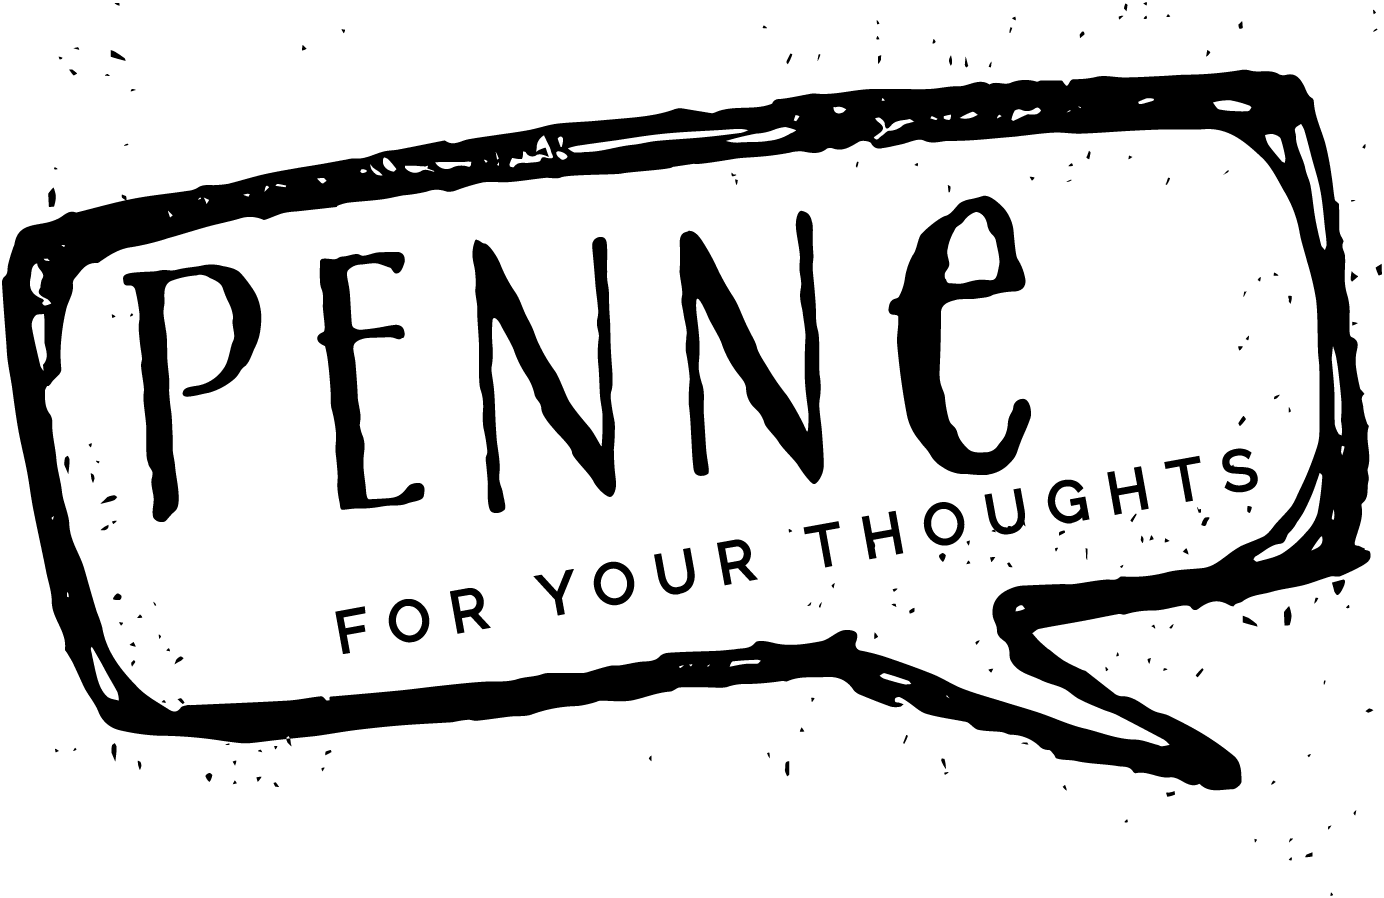 Penne For Your Thoughts logo top